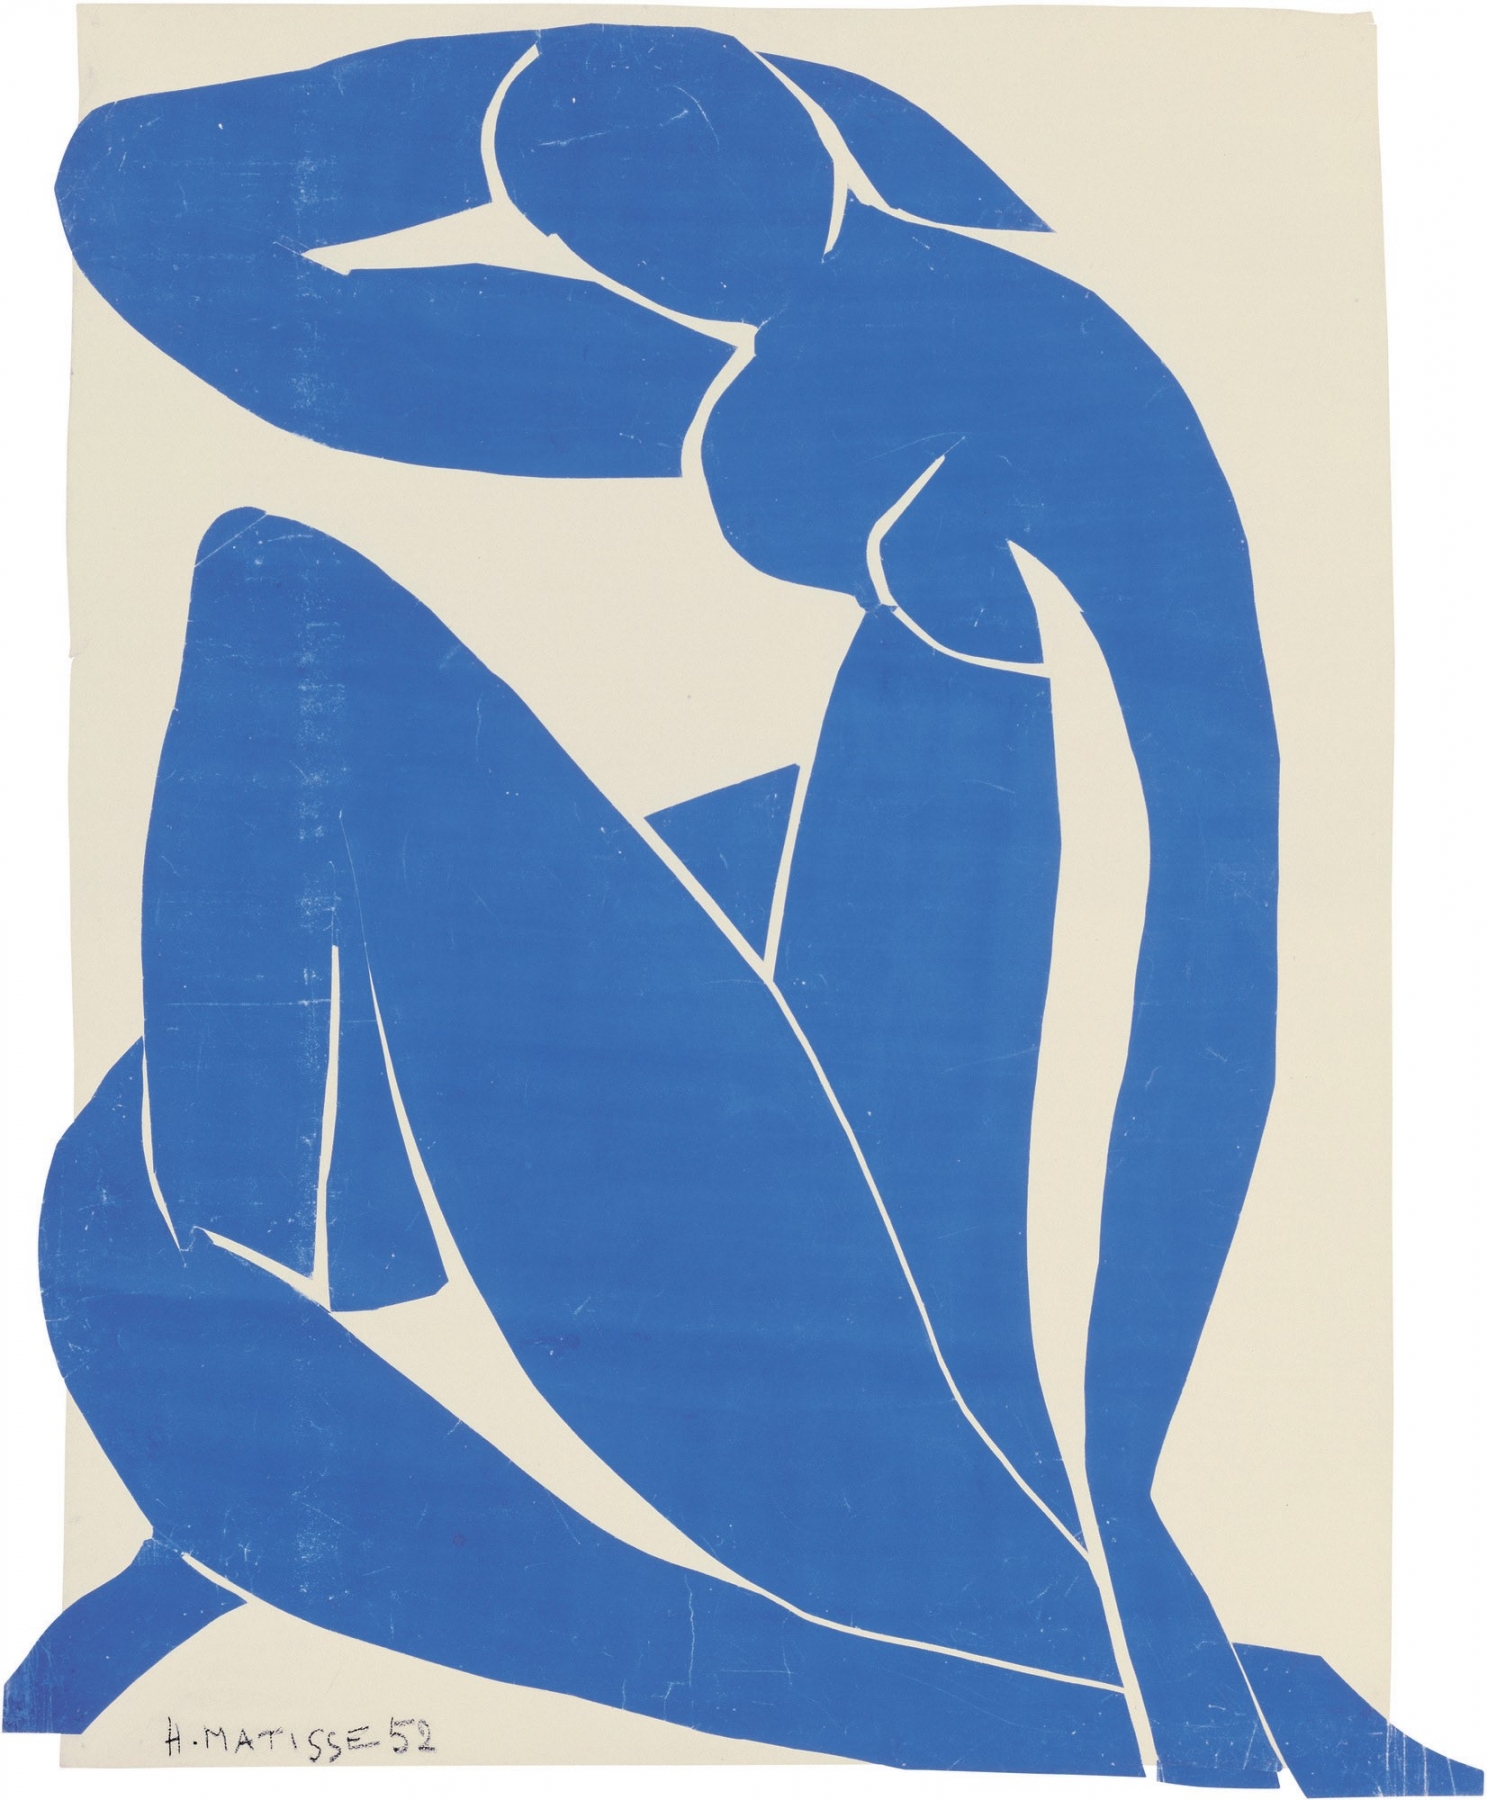 Henri Matisse, &quot;Nu bleu II (Blue Nude II)&quot;, 1952
Gouache on paper, cut and pasted on paper, mounted on canvas,

45 1/2 x 35 inches (116 x 89 cm)
Centre Pompidou, Paris